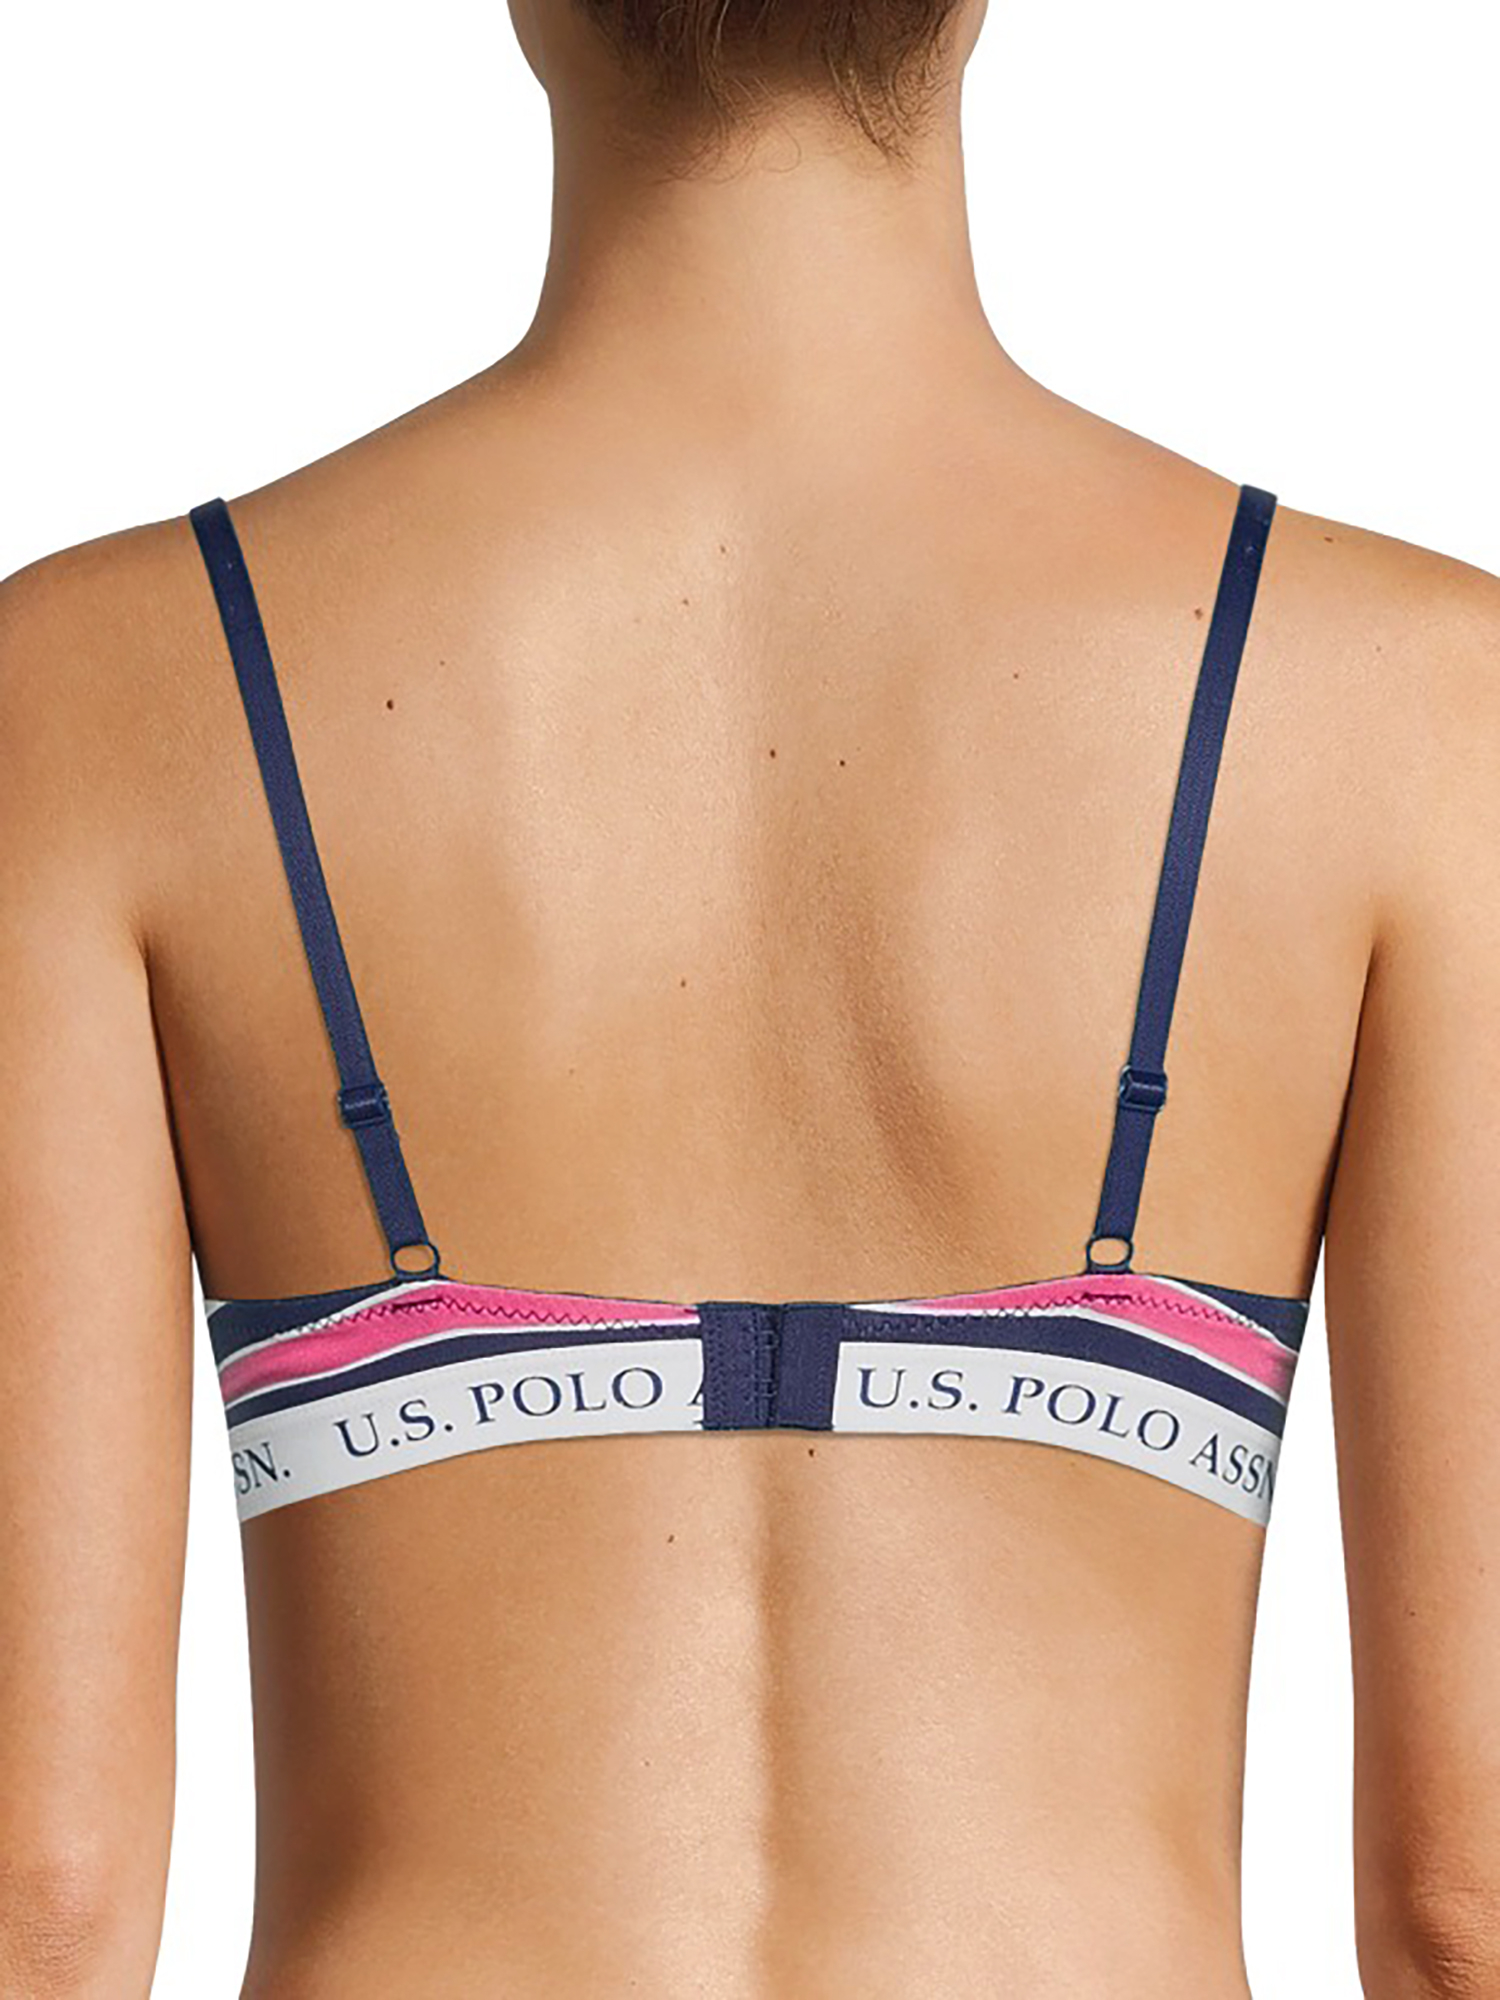 U.S. Polo Assn. Women's 3 Pack Tag-Free Cotton Spandex Push Up Bra Set - image 3 of 3